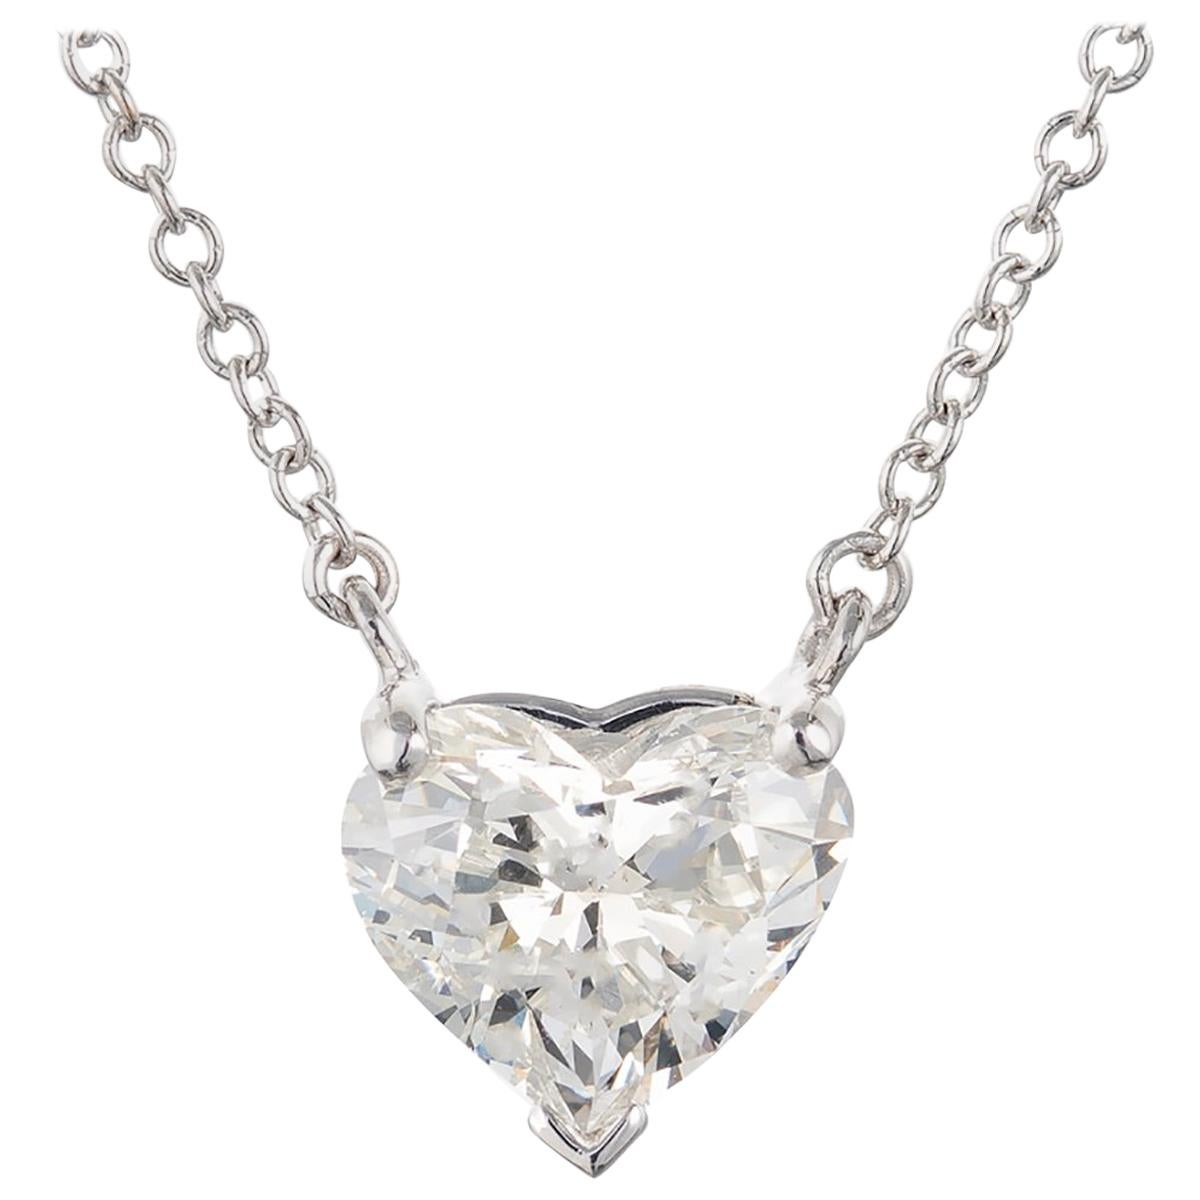 GIA Certified 1.05 Carat Heart Shaped Diamond White Gold Pendant Necklace